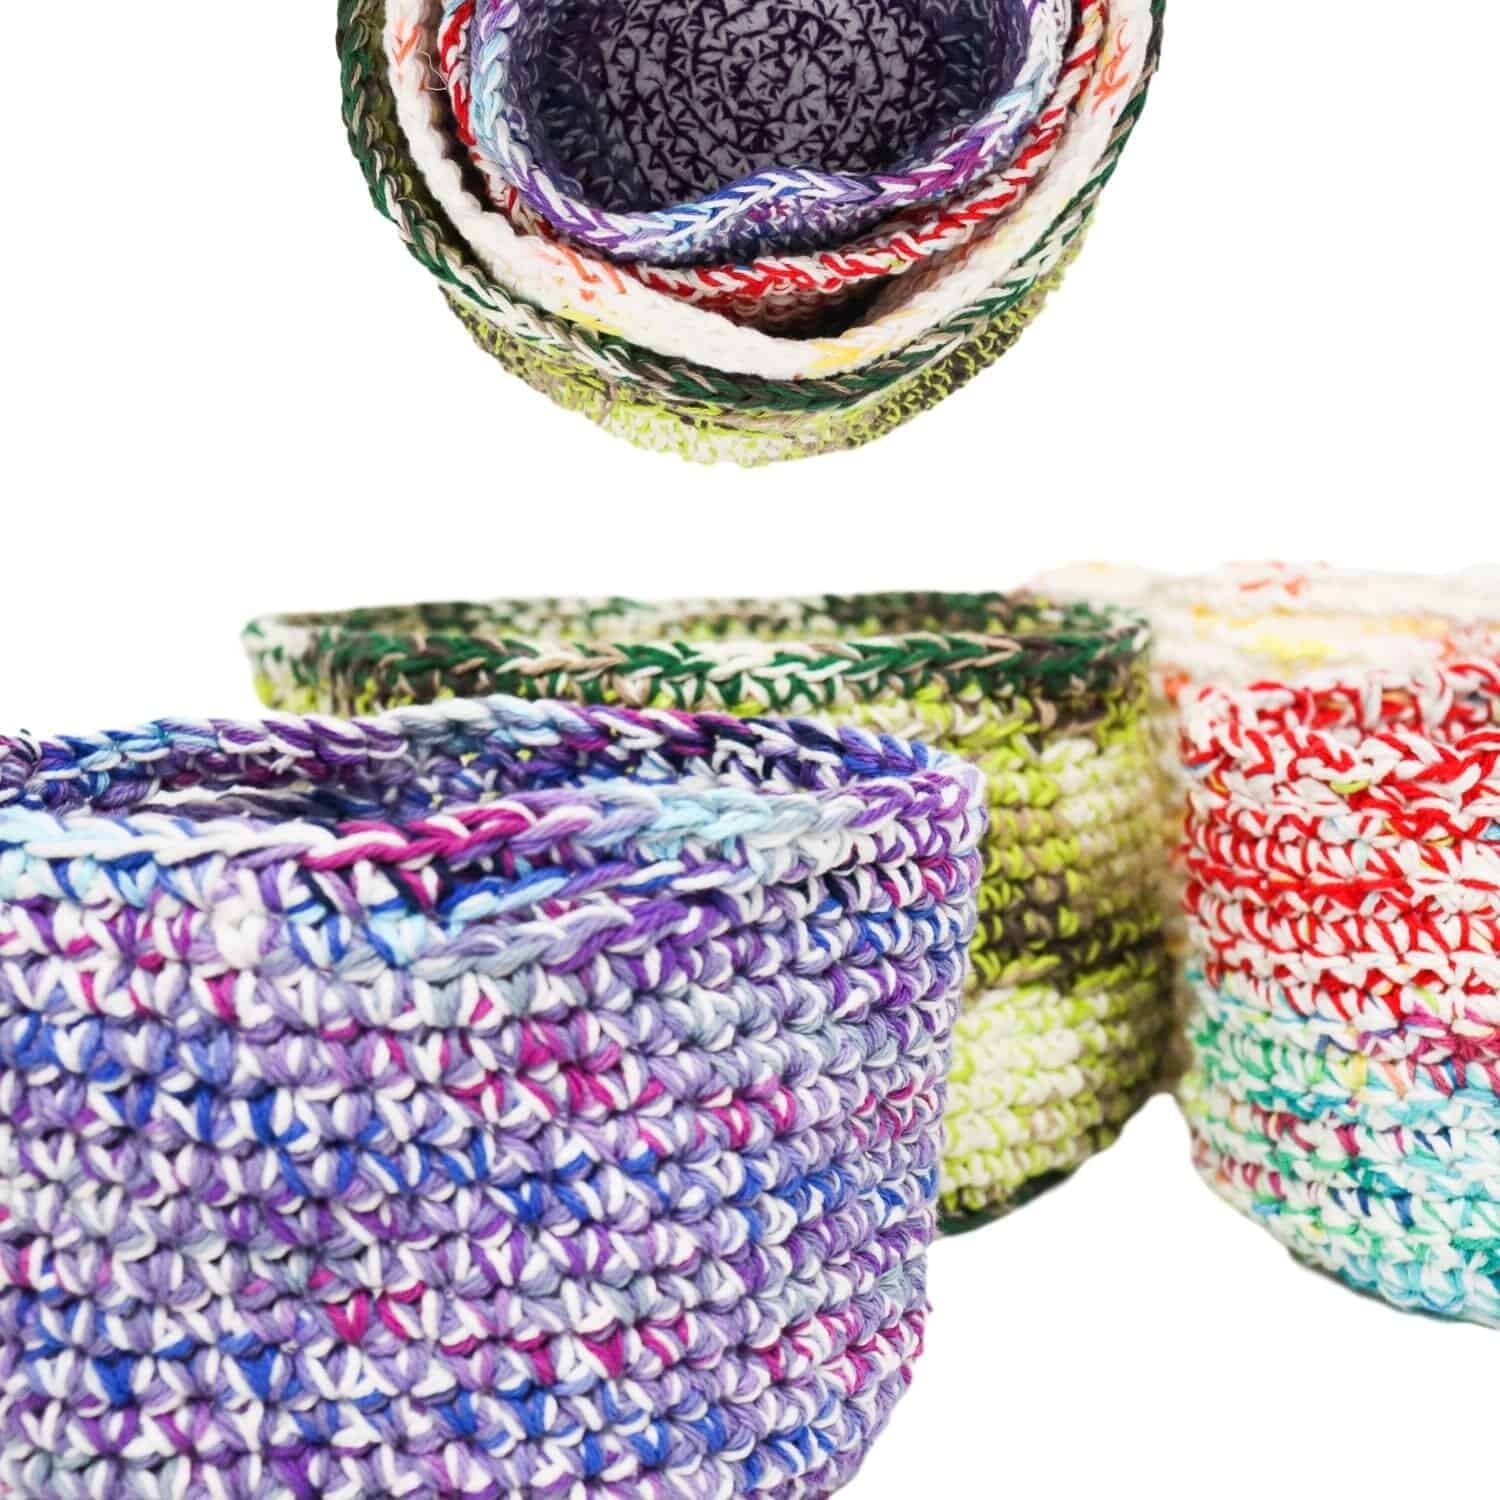 Colorful-Crocheted-Yarn-Storage-Baskets-for-Creative-Movement-Props-and-Instruments-Musikgarten.jpg